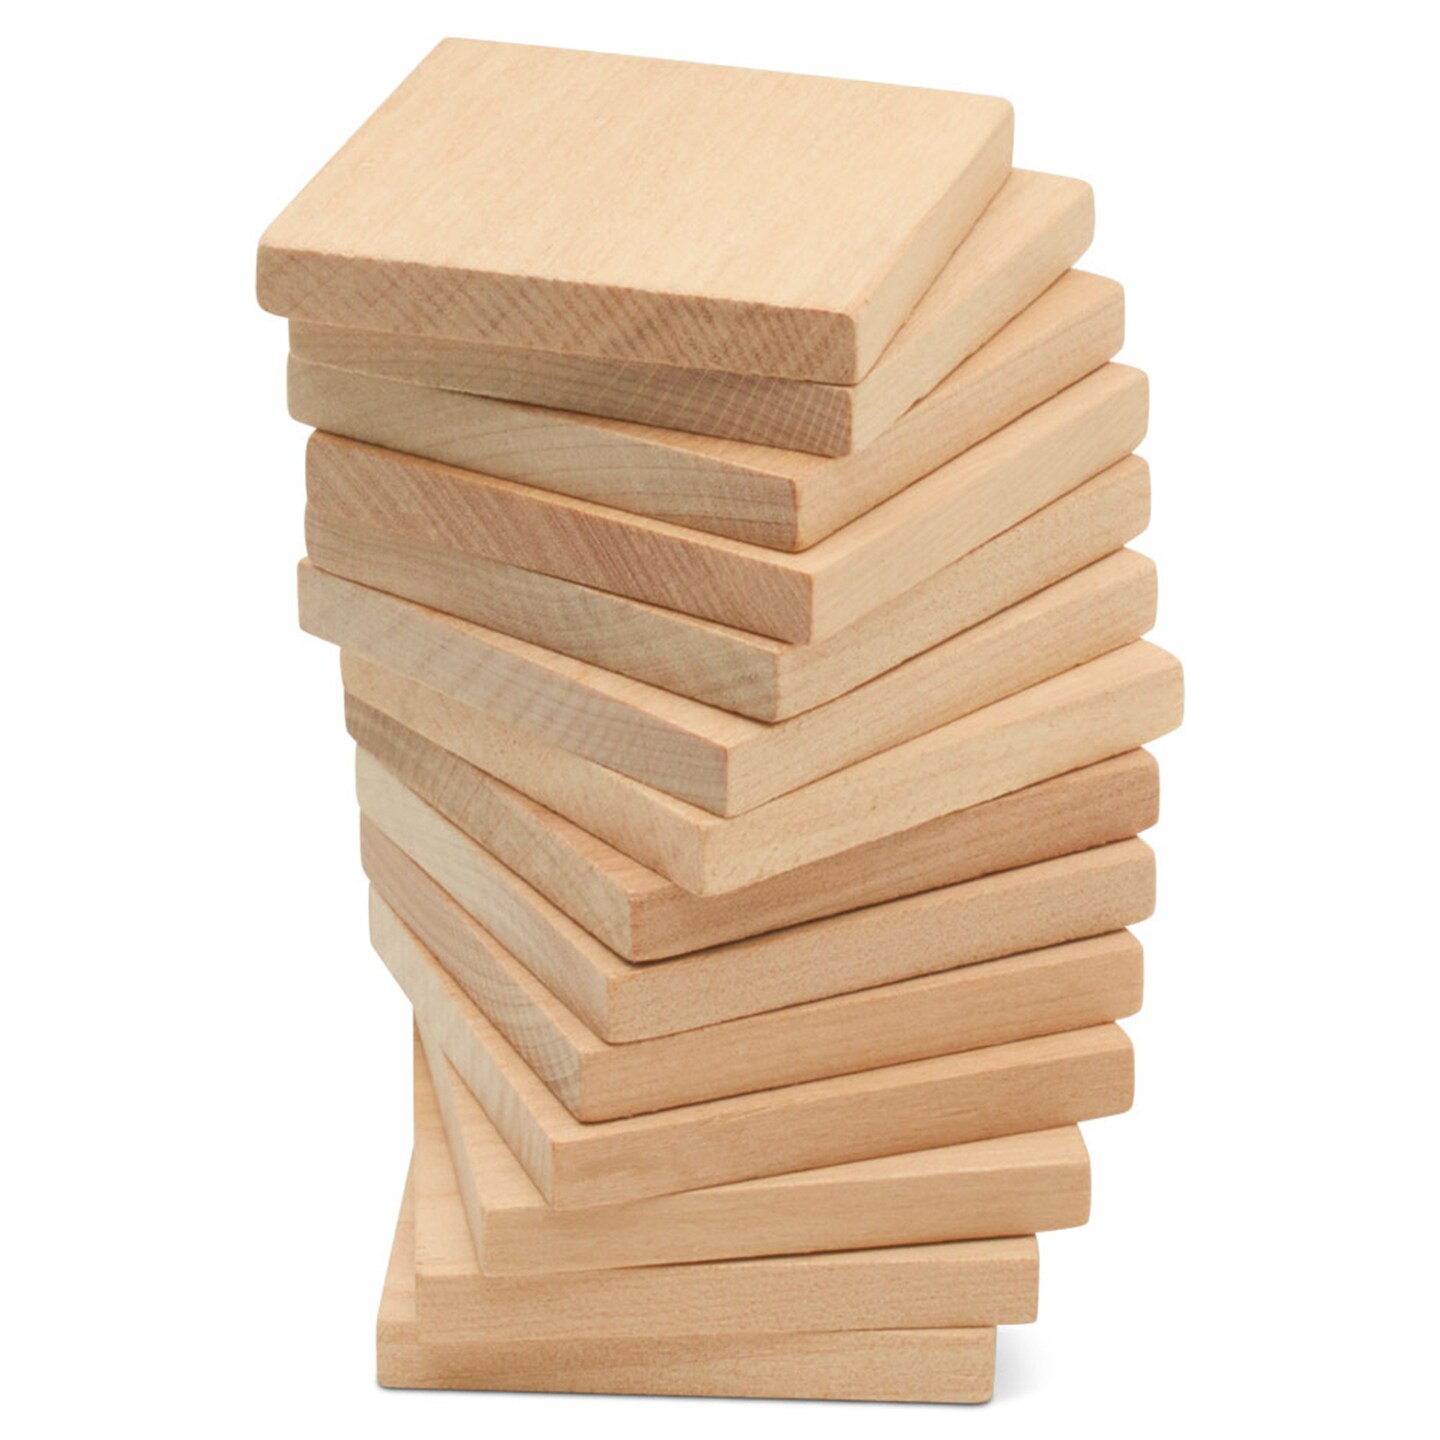 Wood Tiles, Multiple Sizes Available, Blank Wood Squares for Crafts | Woodpeckers